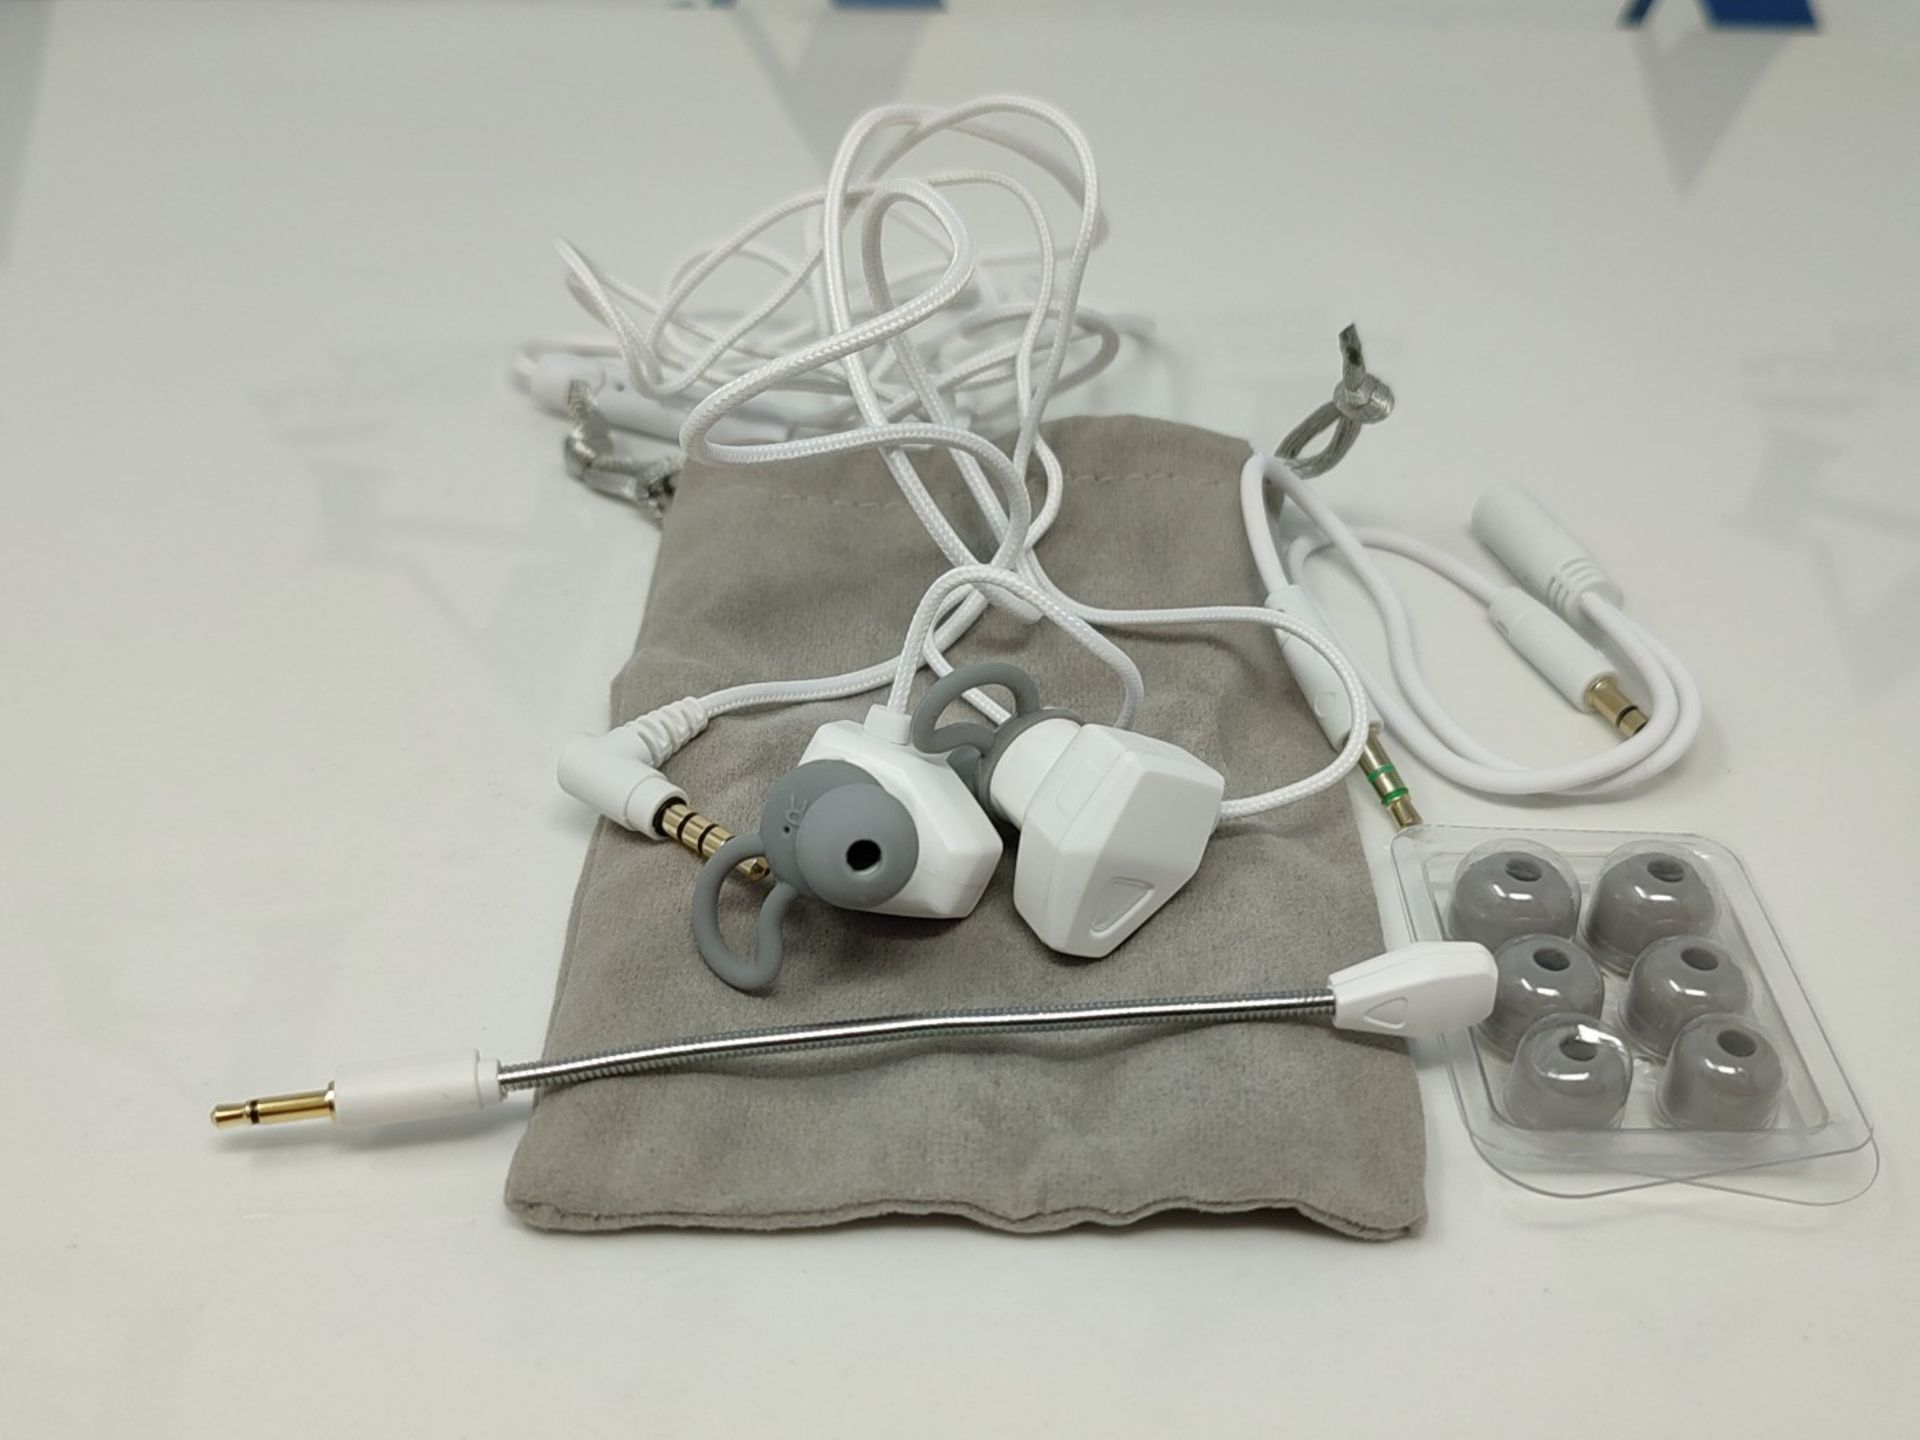 IN-EAR EARPHONE WITH MICROPHONE FOR GAMING MARS GAMING MIHX WHITE - Image 3 of 3